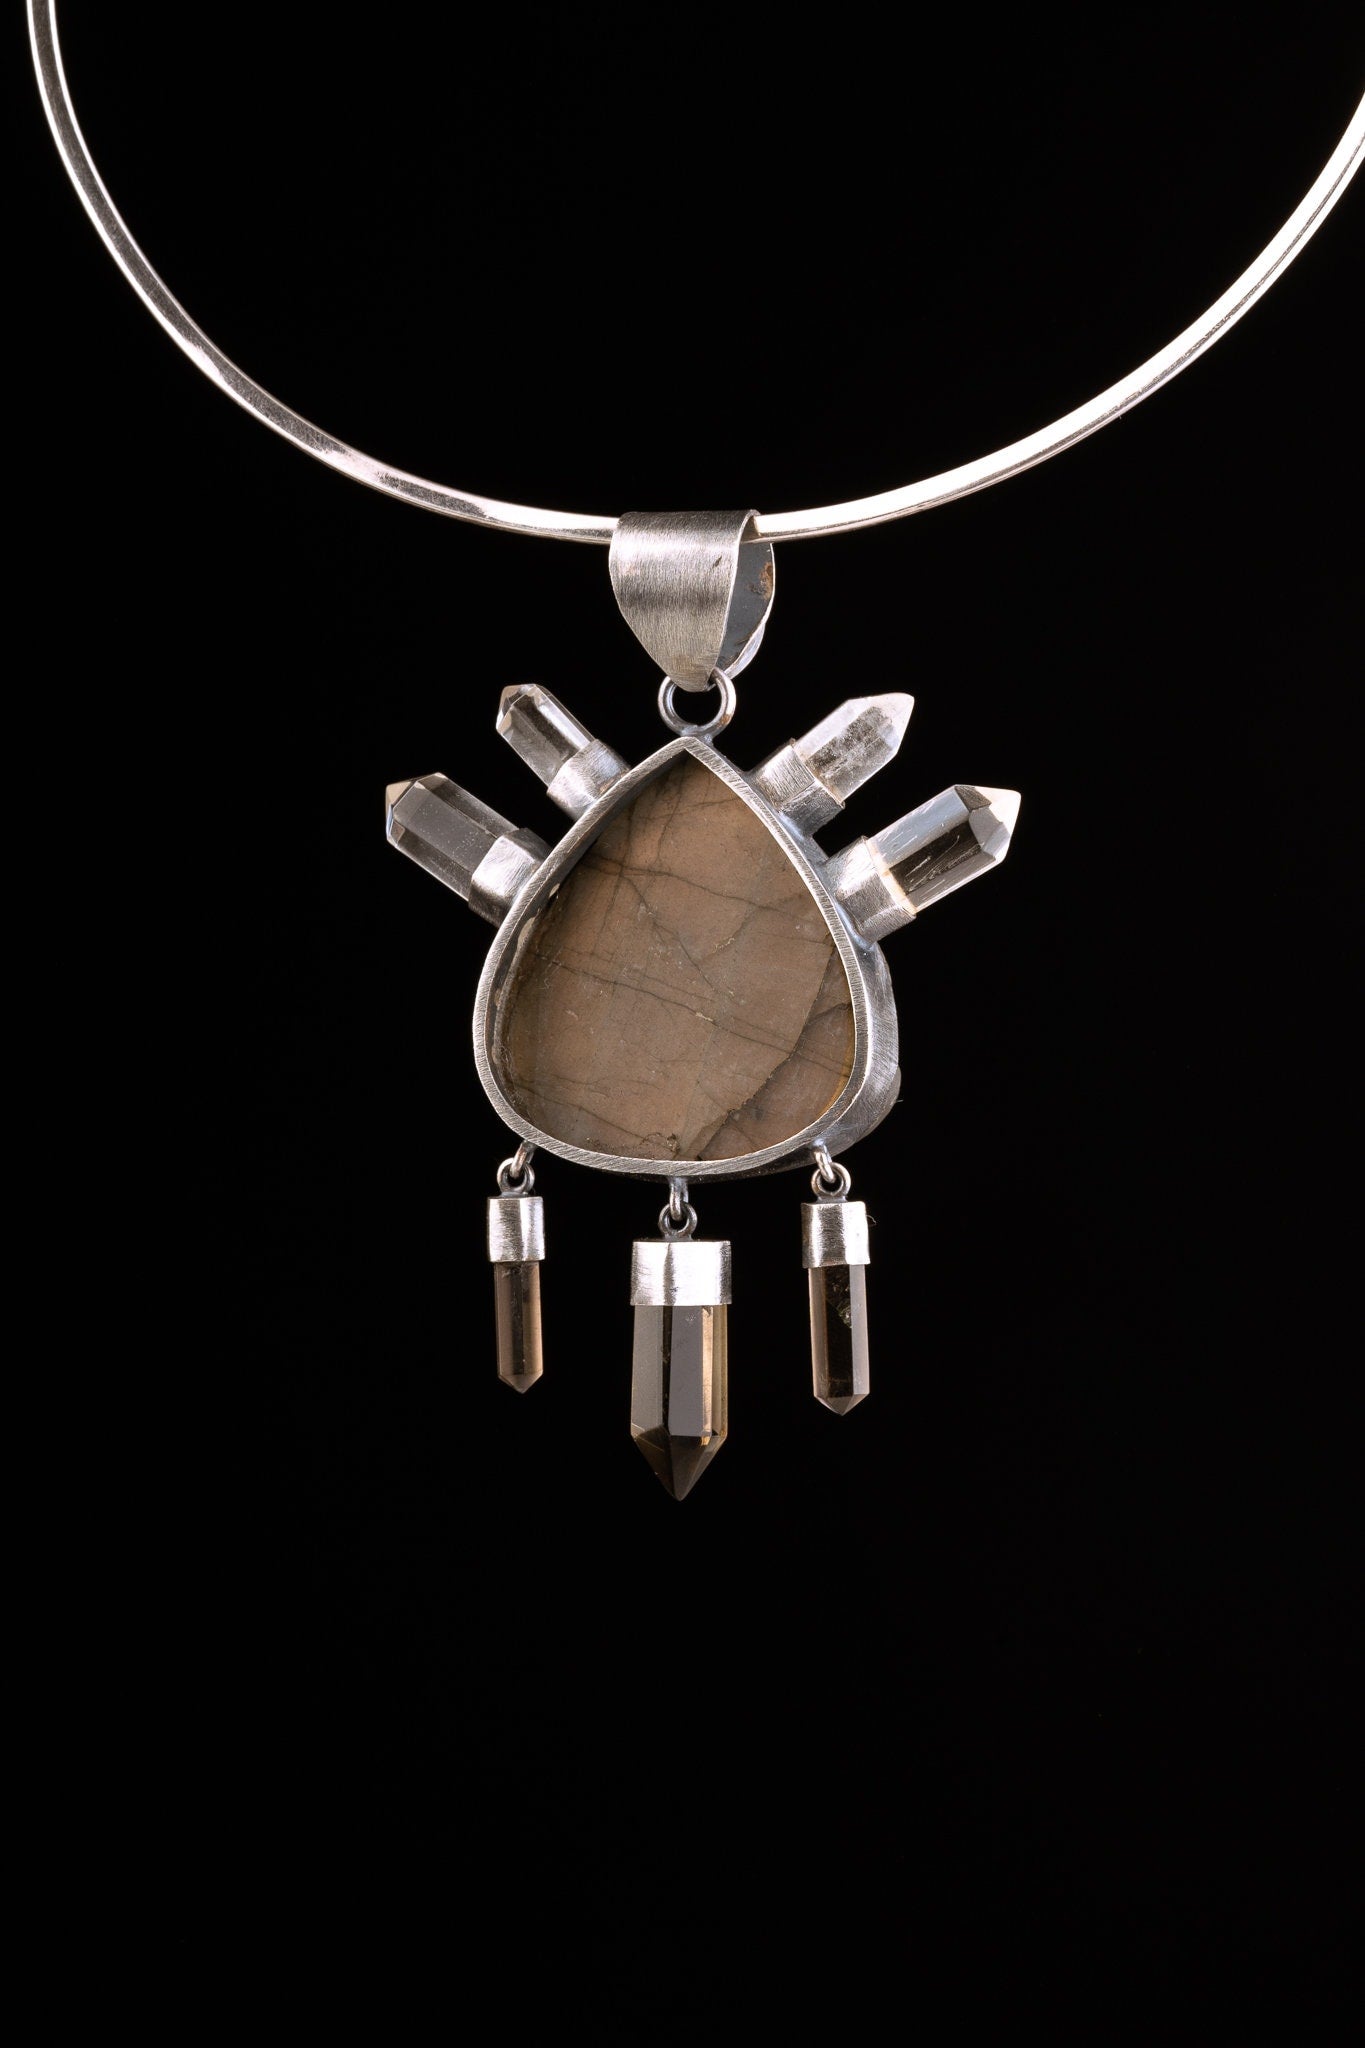 Raw Fiery Labradorite, four cut Clear Quartz pointing up & 3 Citrine points dangling of the bottom - Rustic finish - Crystal Pendant